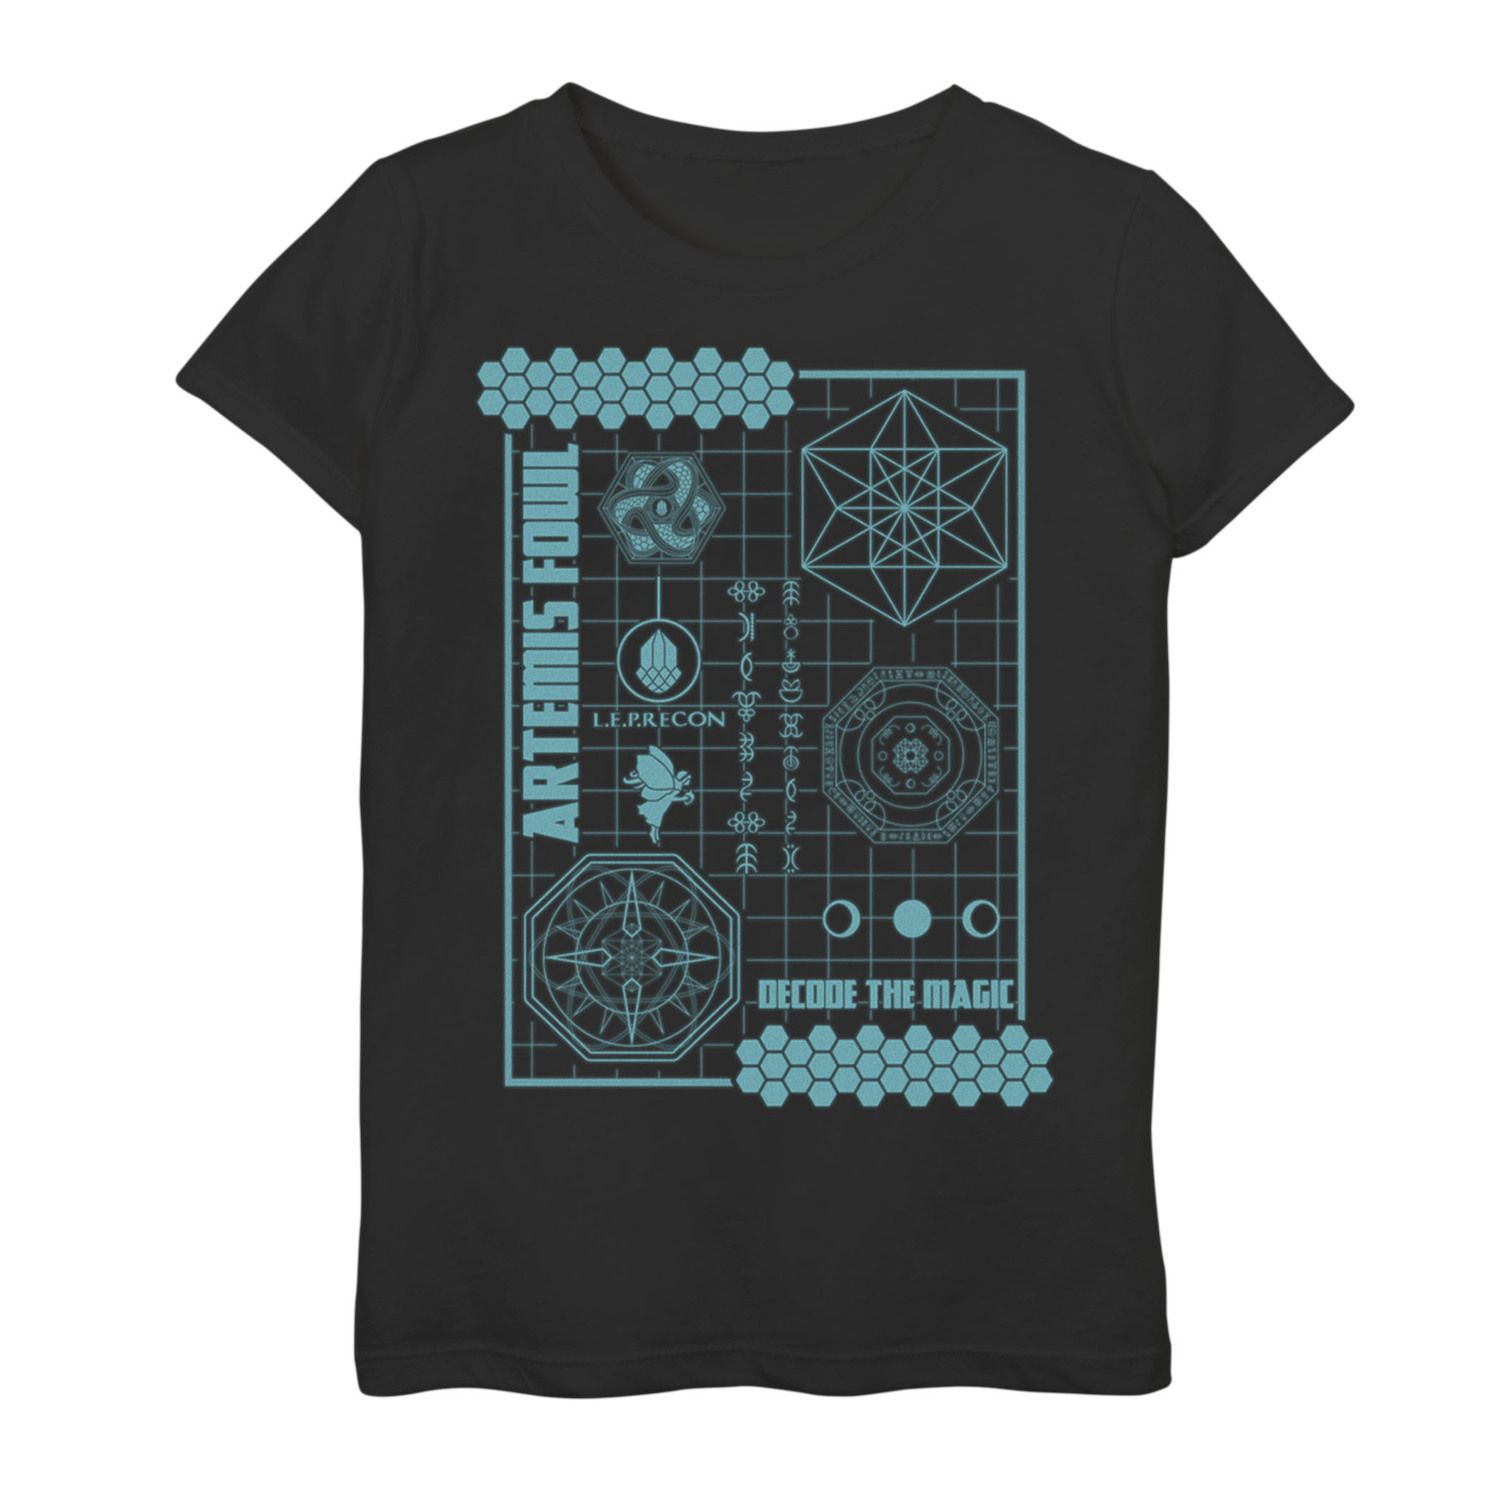 Image for Disney 's Artemis Fowl Girls 7-16 Schematic Poster Graphic Tee at Kohl's.